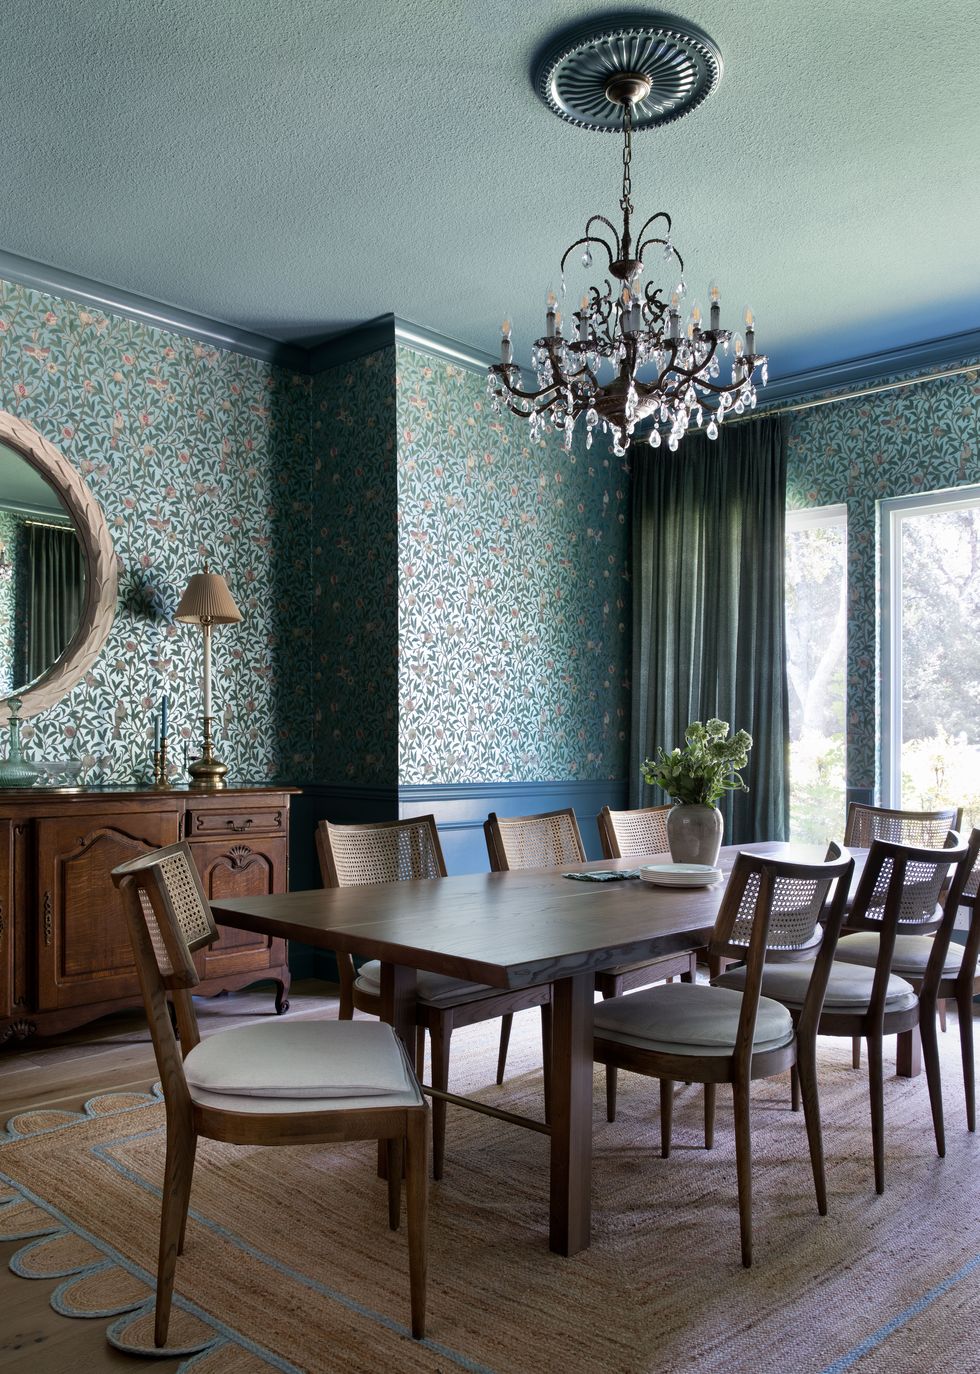 dining room with long table, chandelier, and teal wallpaper